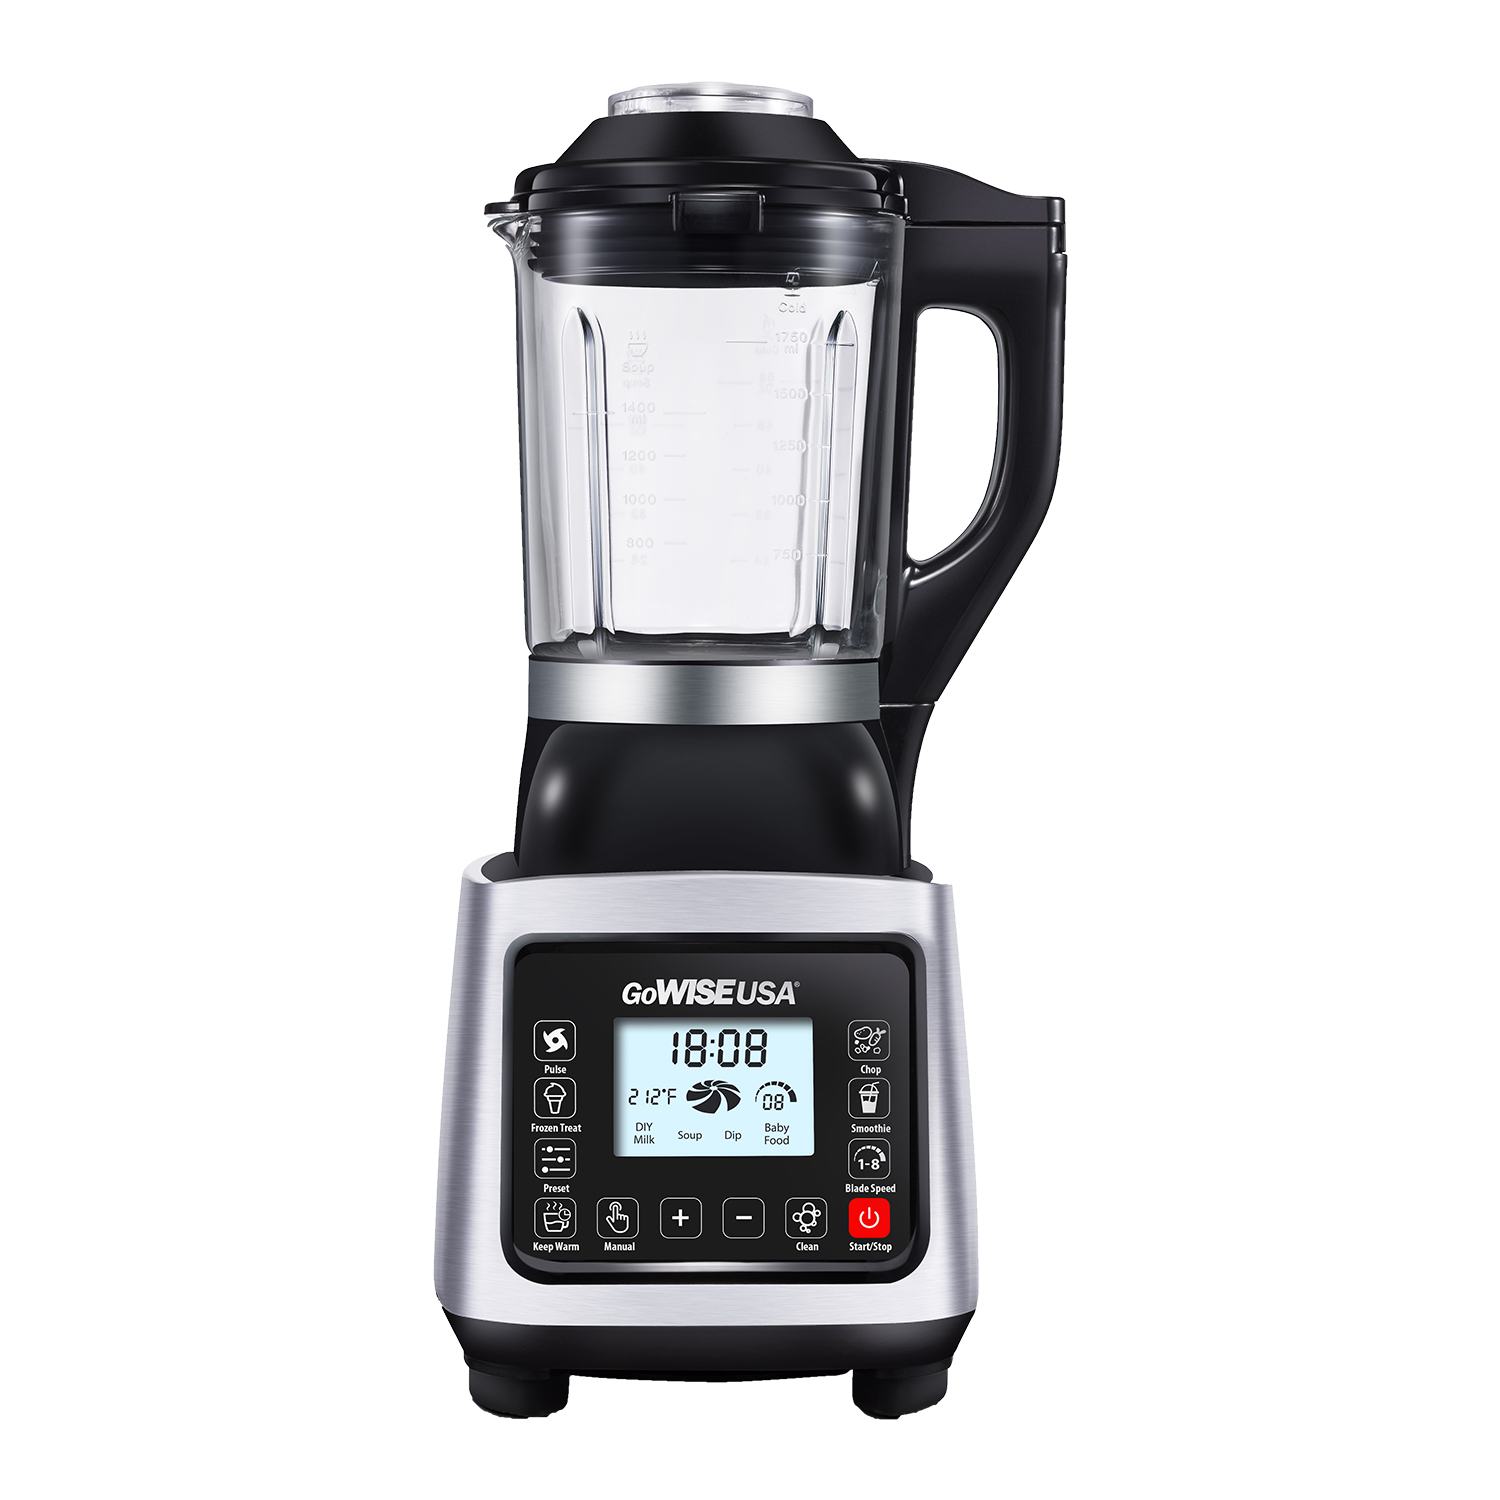 GoWISE USA GW22501 Premier High Performance Heating Blender - image 2 of 8